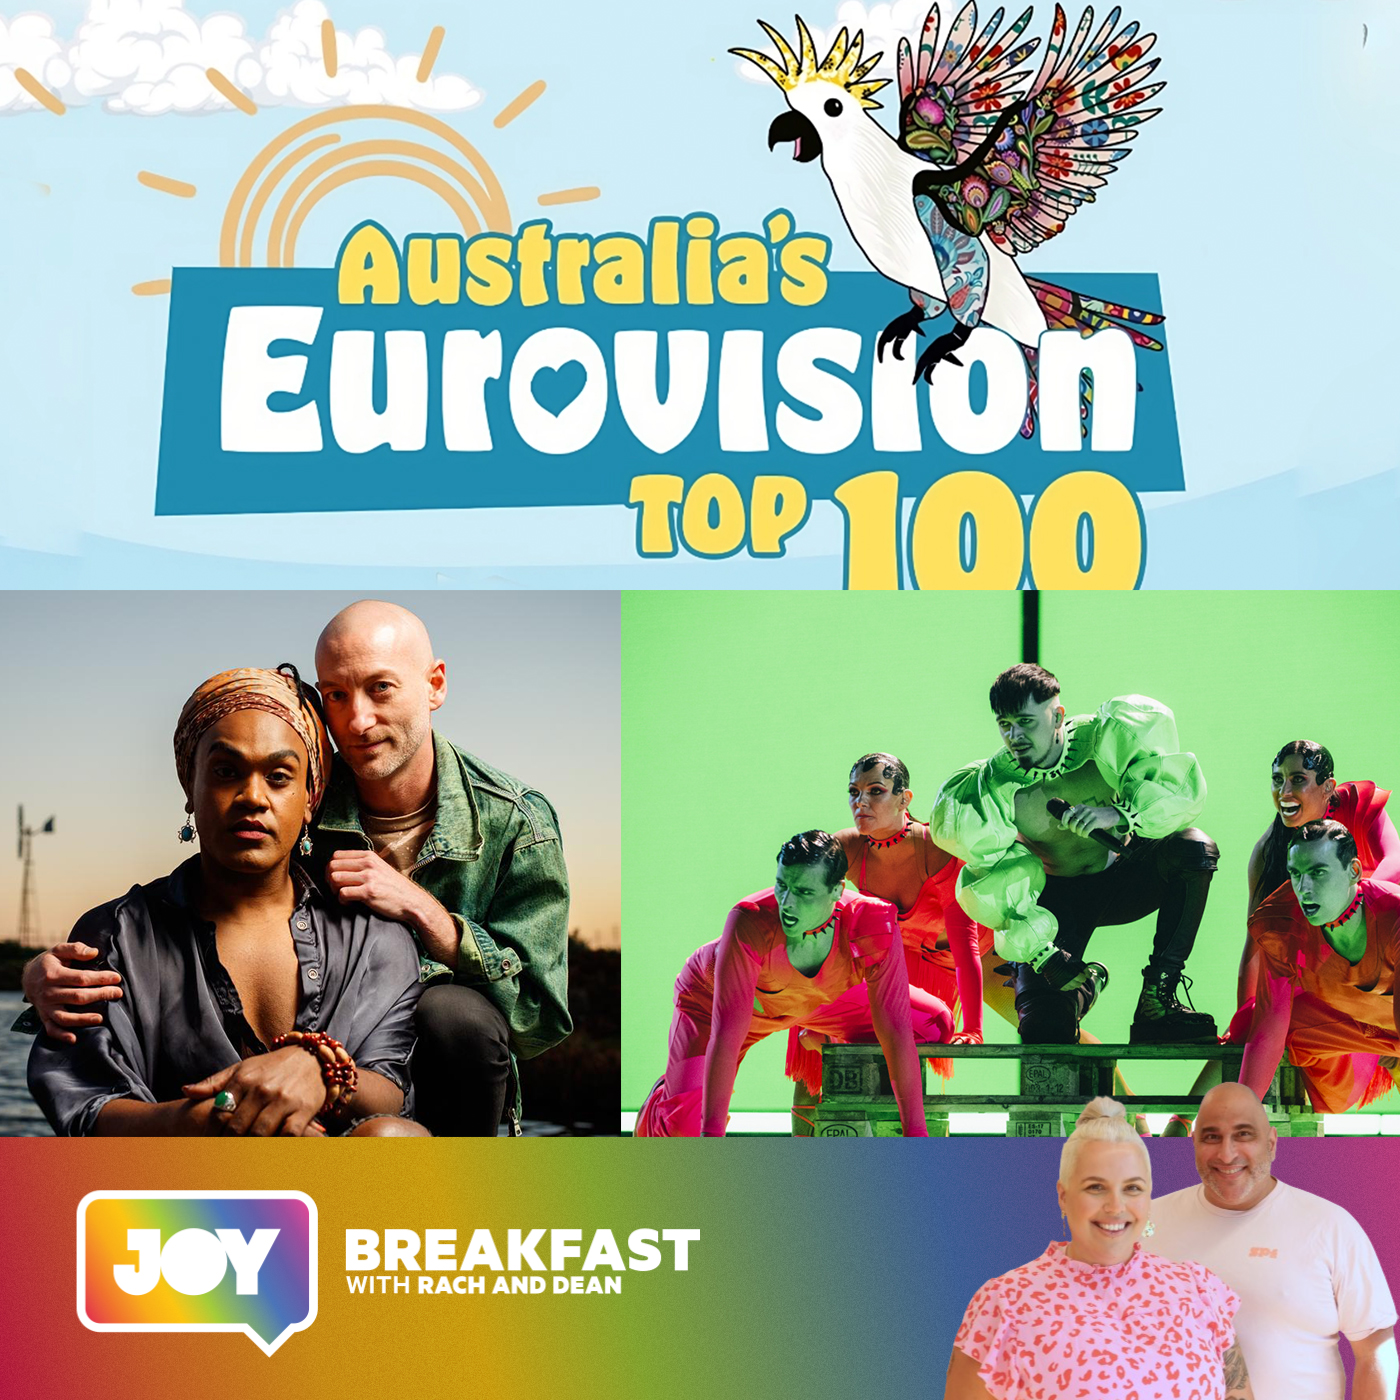 How’d we go in the Eurovision Top 100?